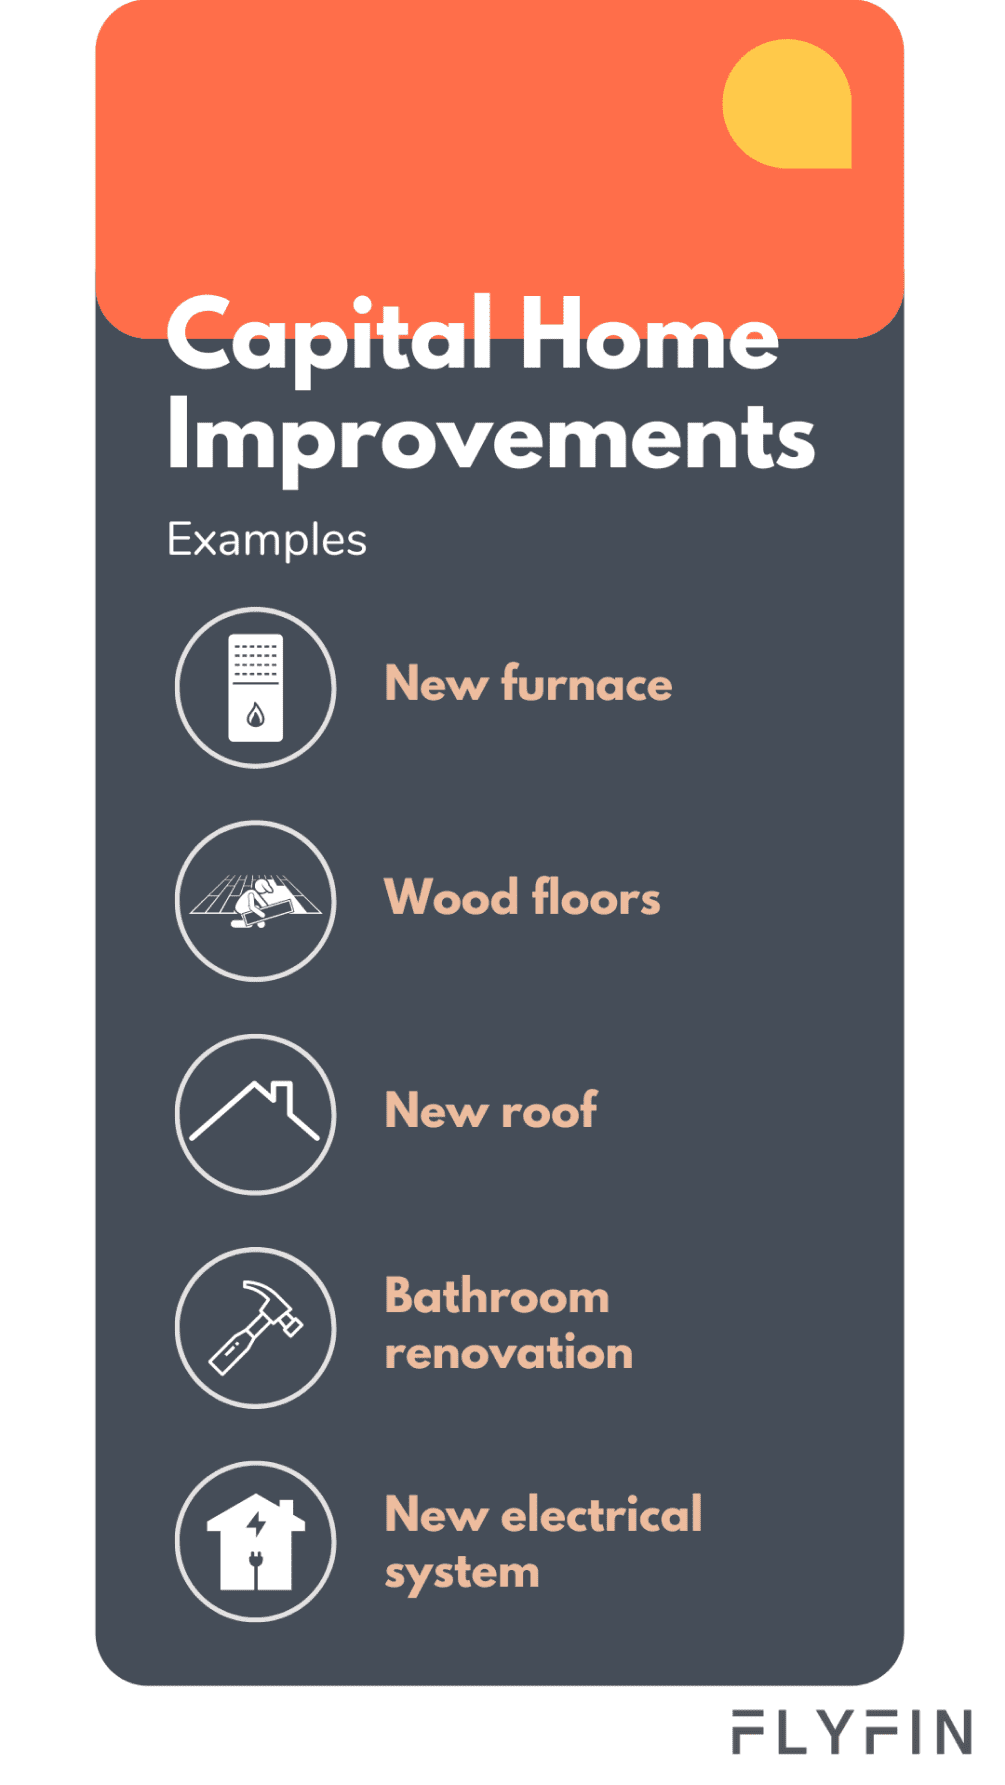 Image showcasing examples of home improvements such as new furnace, wood floors, new roof, bathroom renovation, and new electrical system offered by eCapital Home Improvements. No mention of self-employment, 1099, freelancer, or taxes.